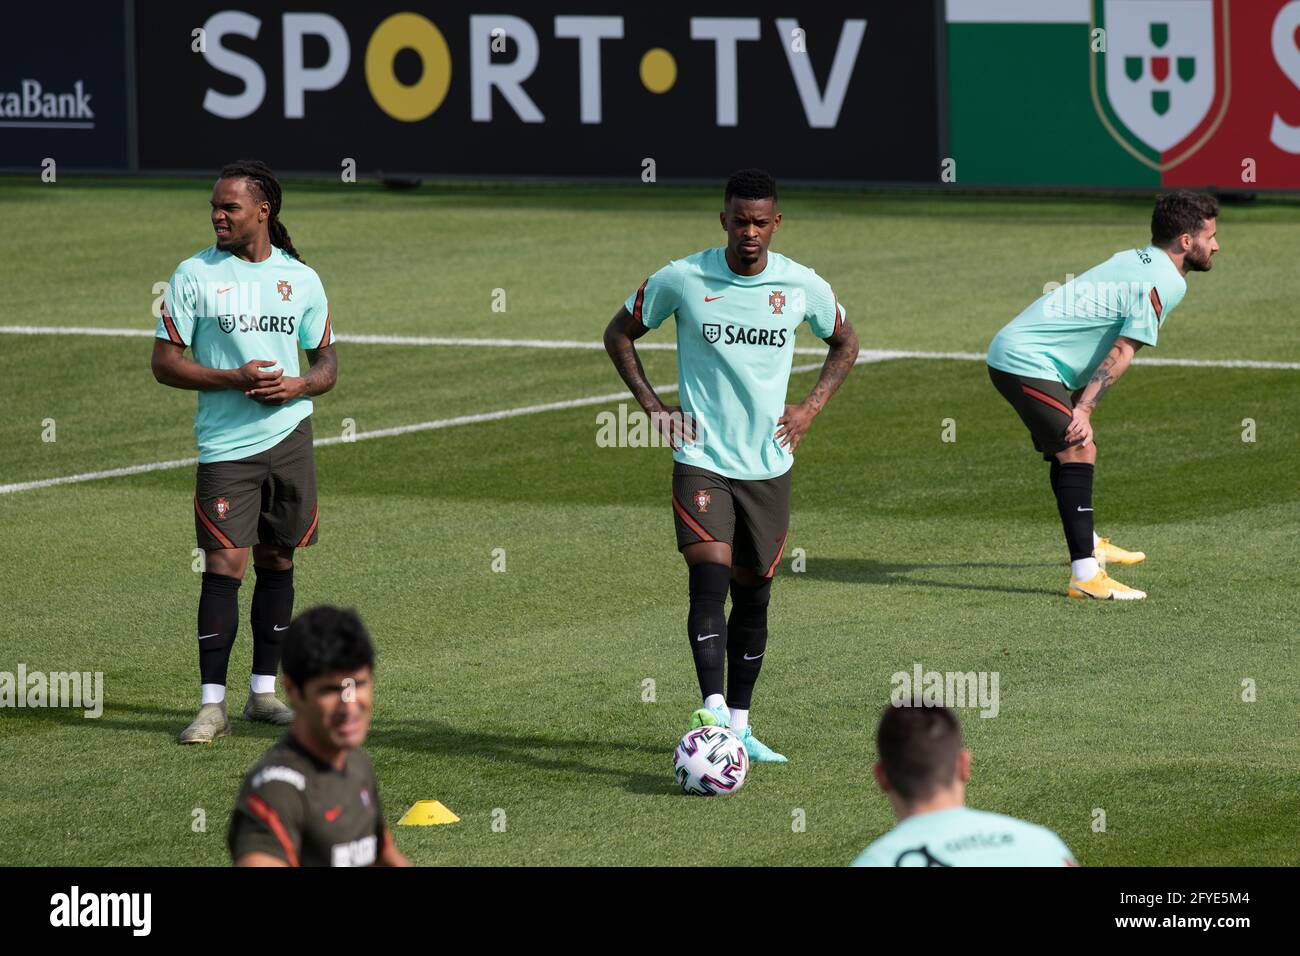 Oeiras, Portugal. 27th May, 2021. Renato Sanches (L), Nelson Semedo (C) and Rafa Silva (R) are seen in action during the training session at Cidade do Futebol training ground in Oeiras.Portugal football team trains for the first time before competing in the European football championship - EURO 2020 - scheduled to start on June 11th. Credit: SOPA Images Limited/Alamy Live News Stock Photo